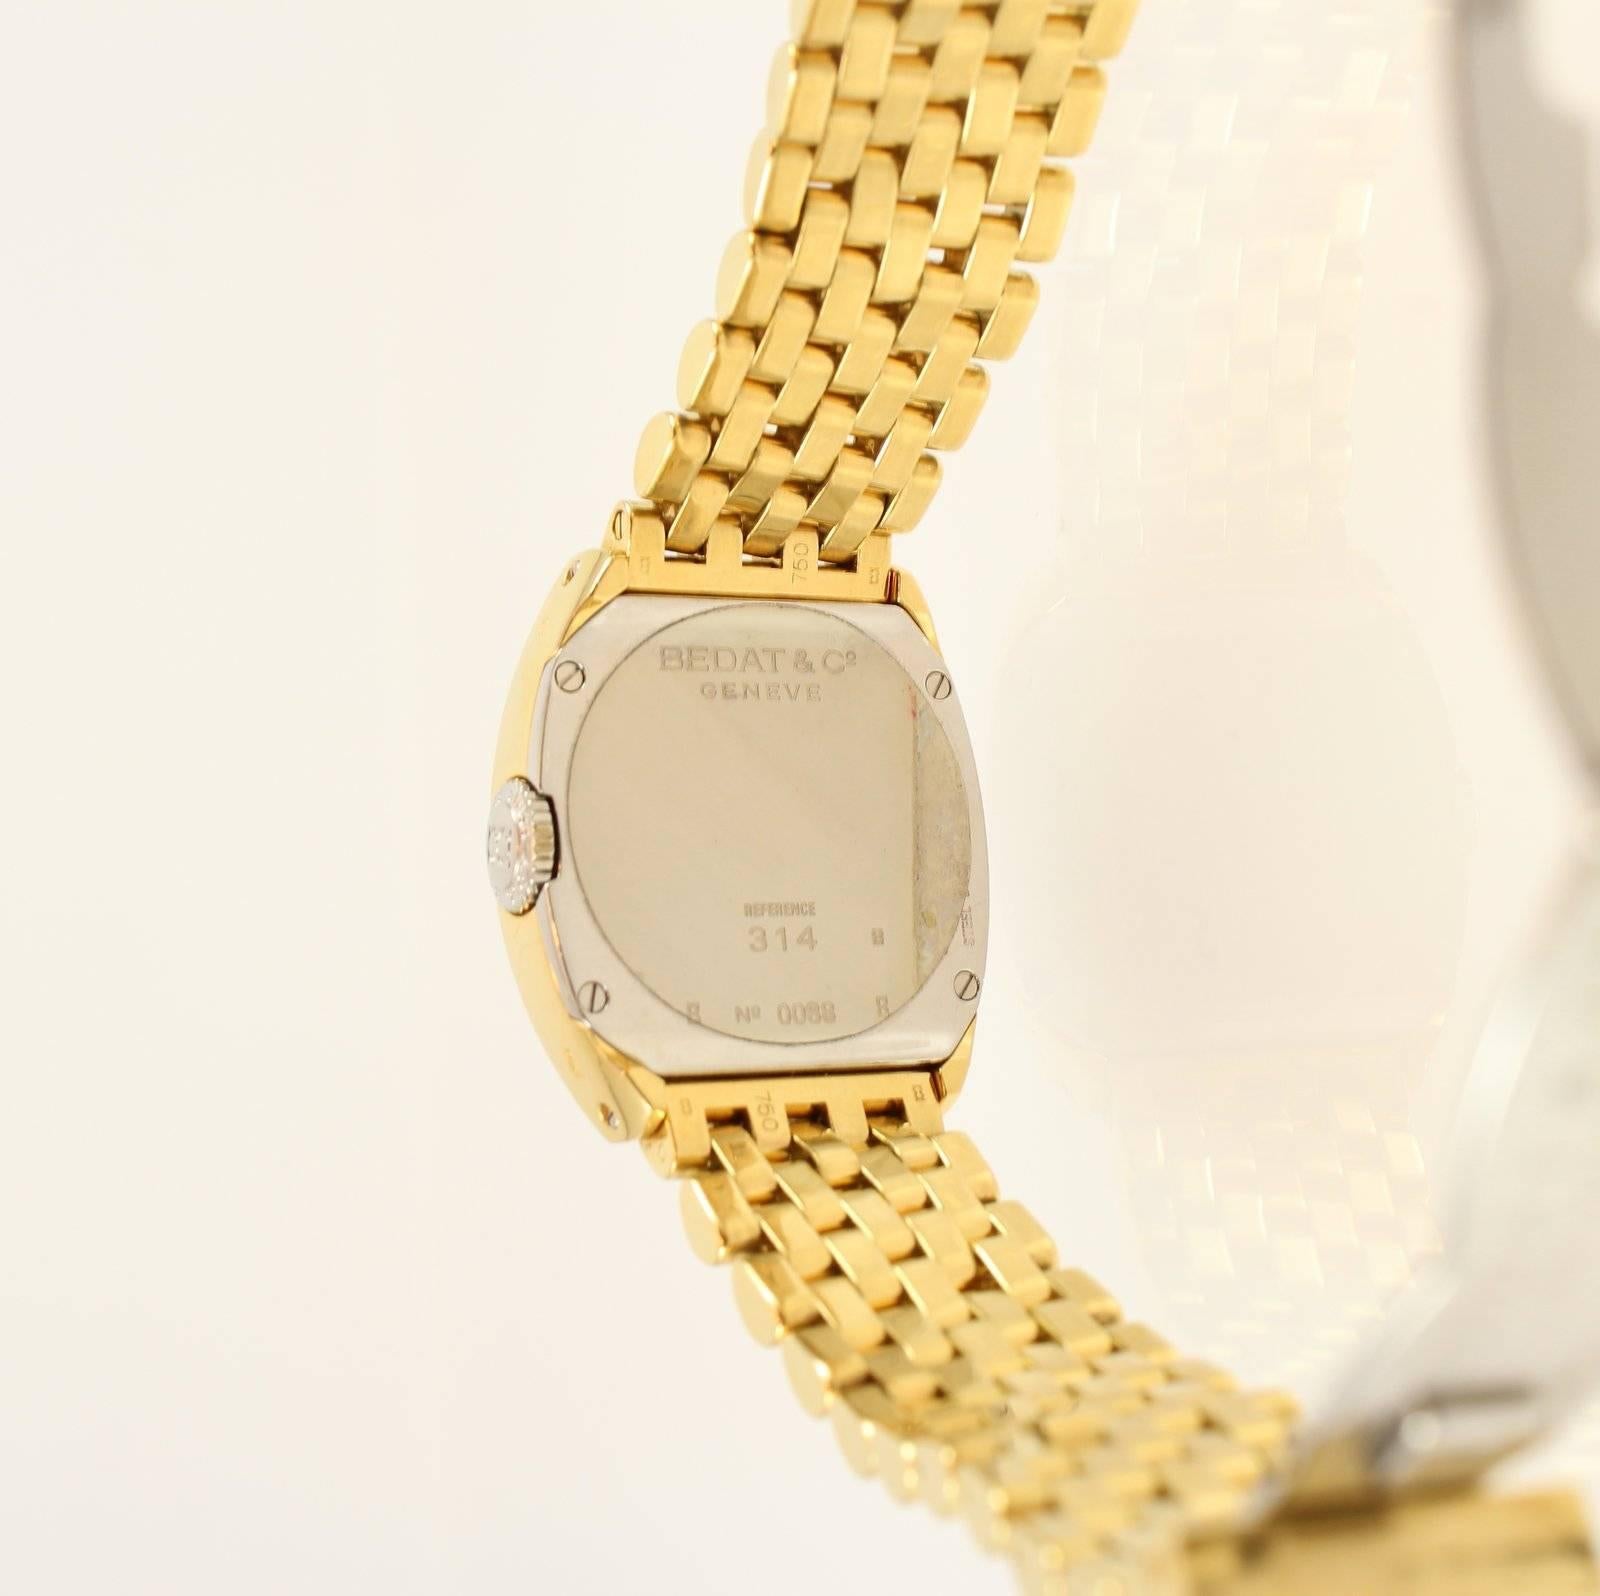 Bedat #3, 18K yellow gold bracelet watch with diamond markers, quartz, antique white dial, date window, 8 diamond markers. Serial #0088, Reference #314
Last retail $16500
New in box , Never worn
2 year warranty